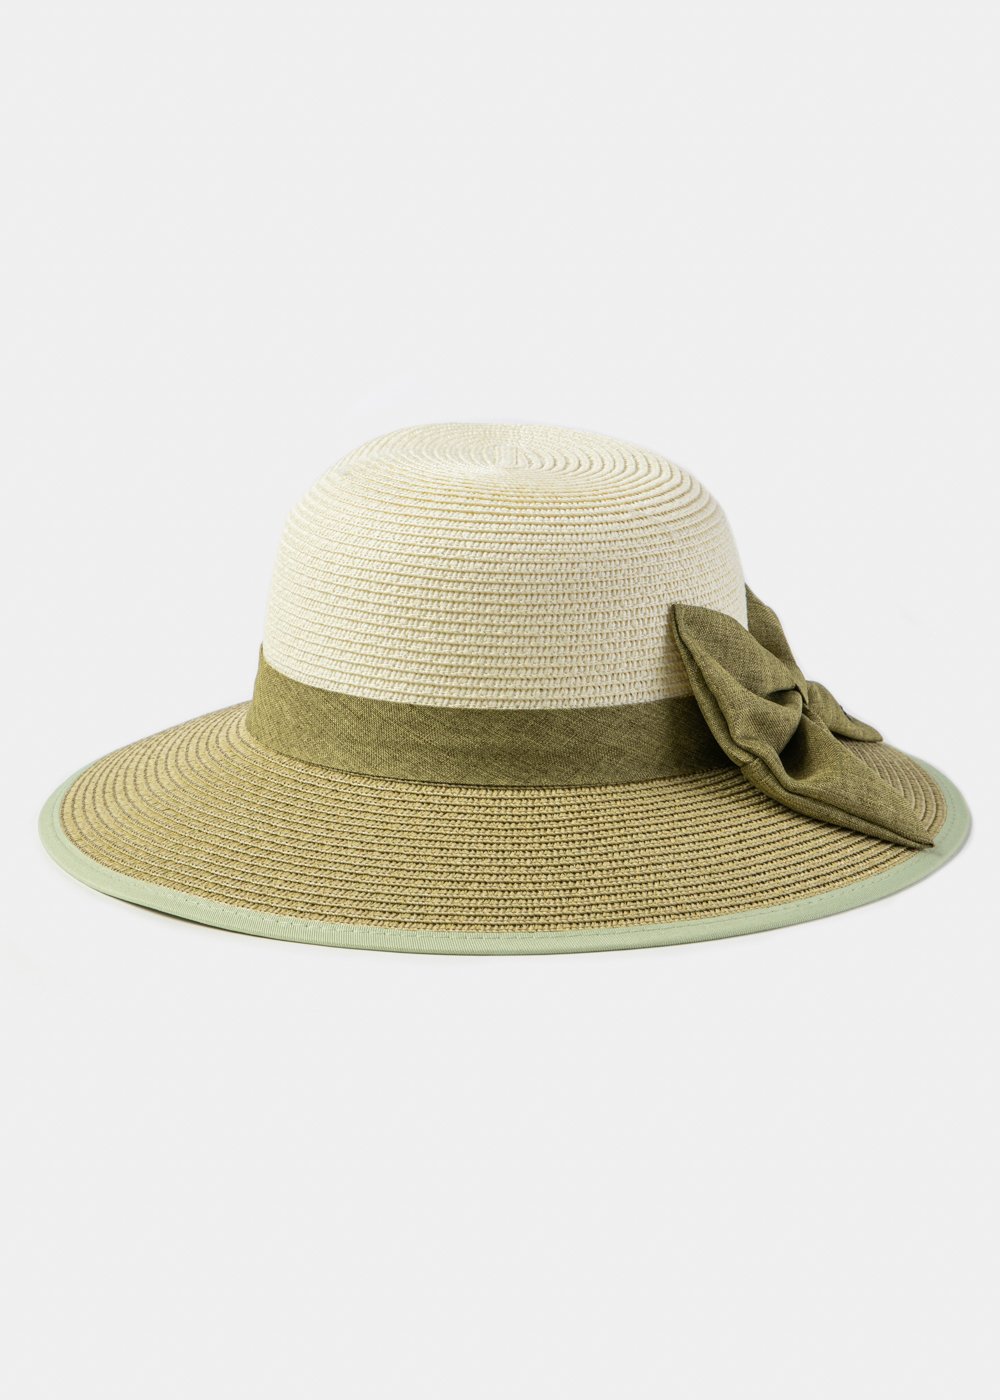 Olive & Beige Hat w/ Olive Bow